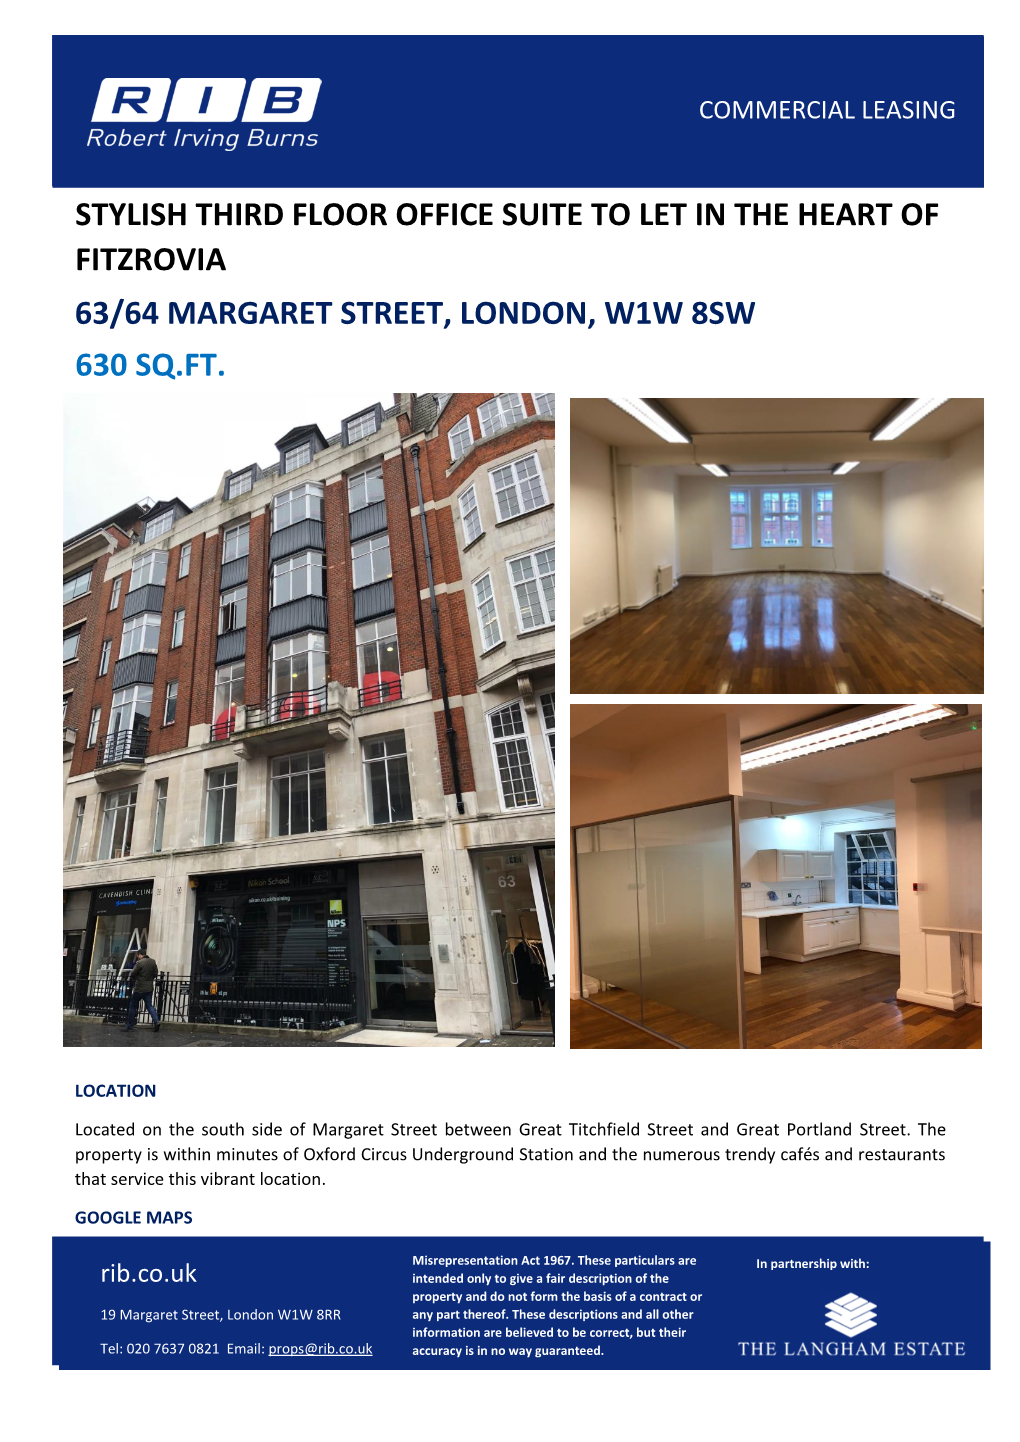 Stylish Third Floor Office Suite to Let in the Heart of Fitzrovia